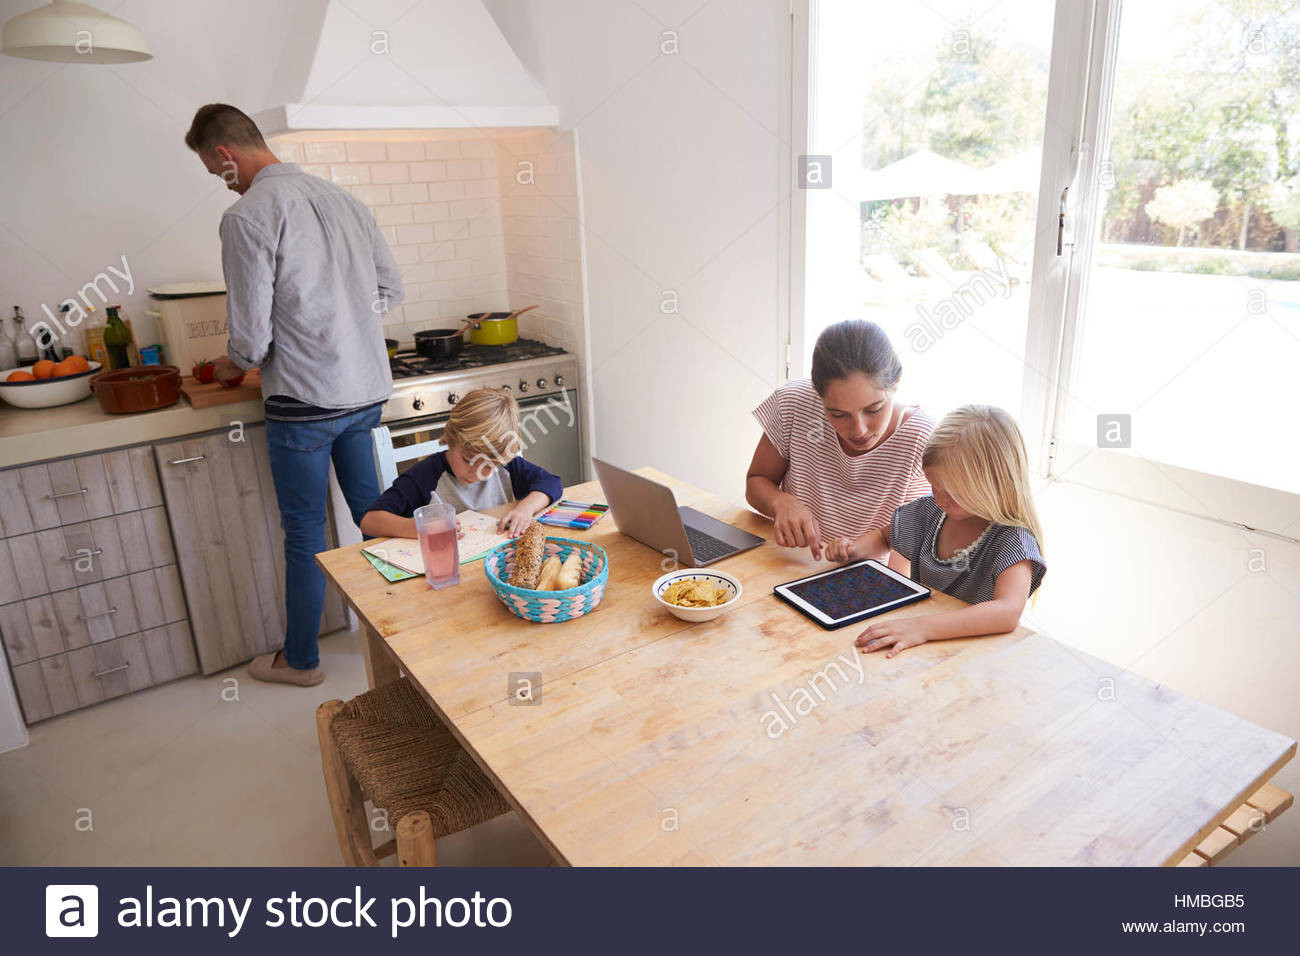 Kids Kitchen Table
 Dad cooking and mum with kids at kitchen table high angle